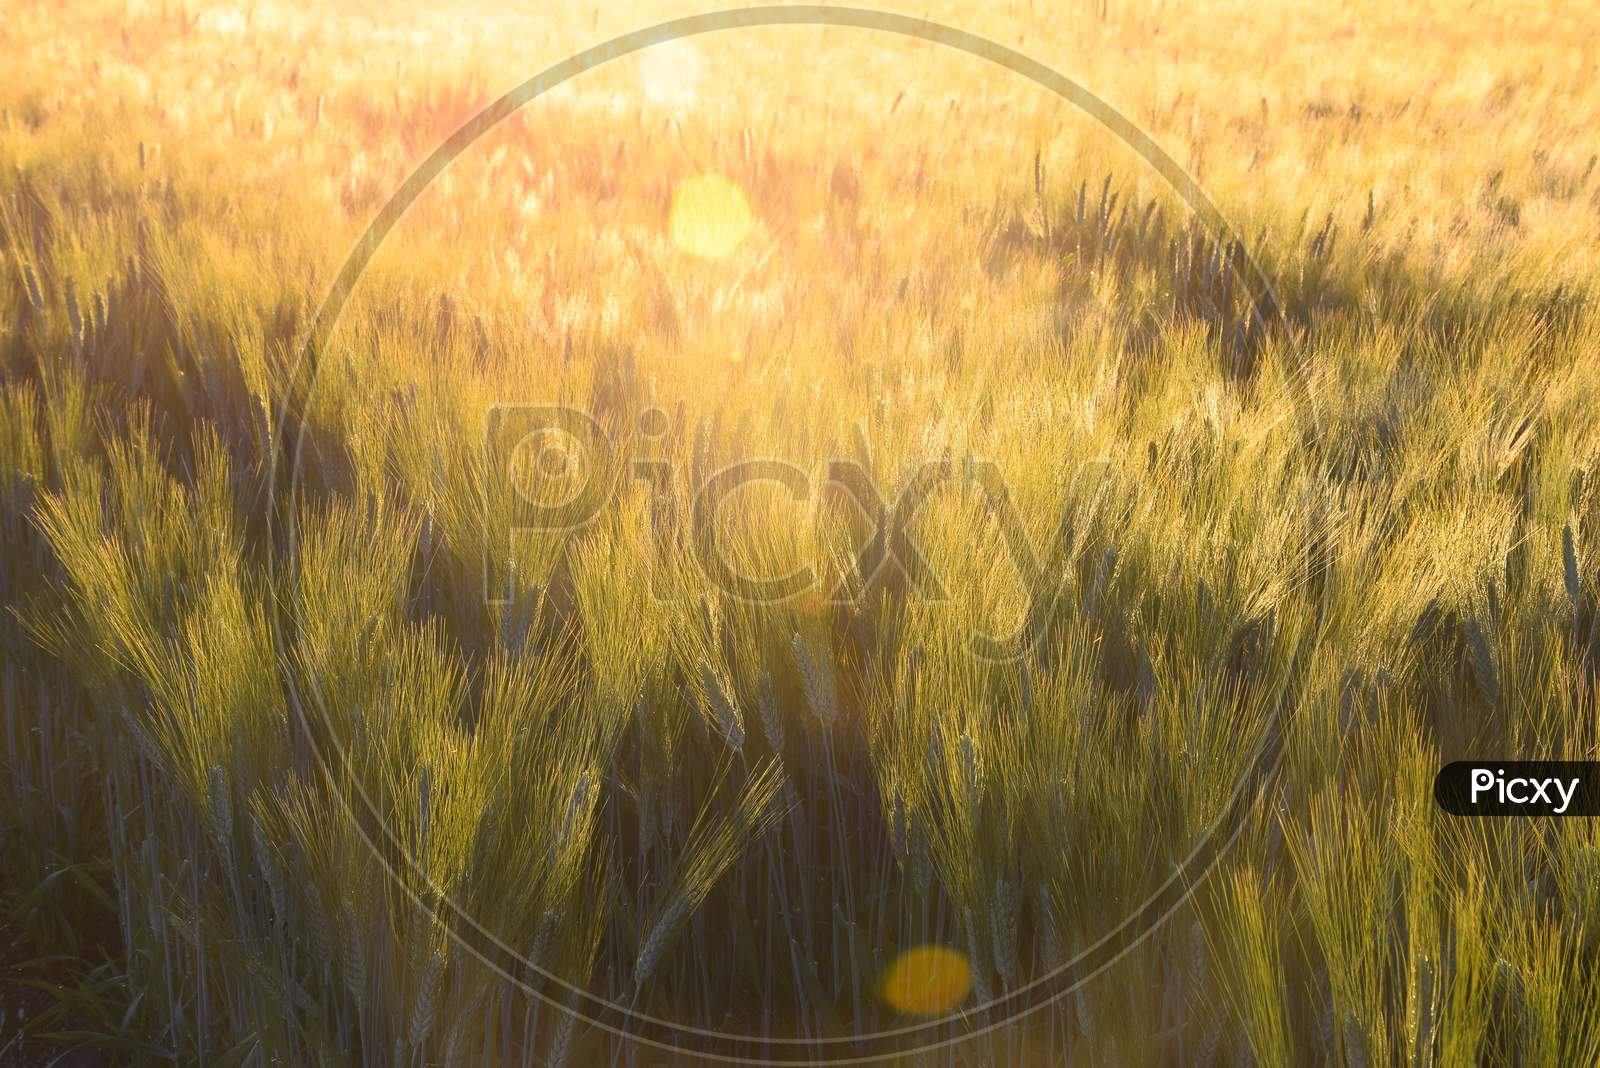 Wheat Earrings Are Shining With The Rays Of The Sun. The Sun Scattering Over The Wheat Plants,